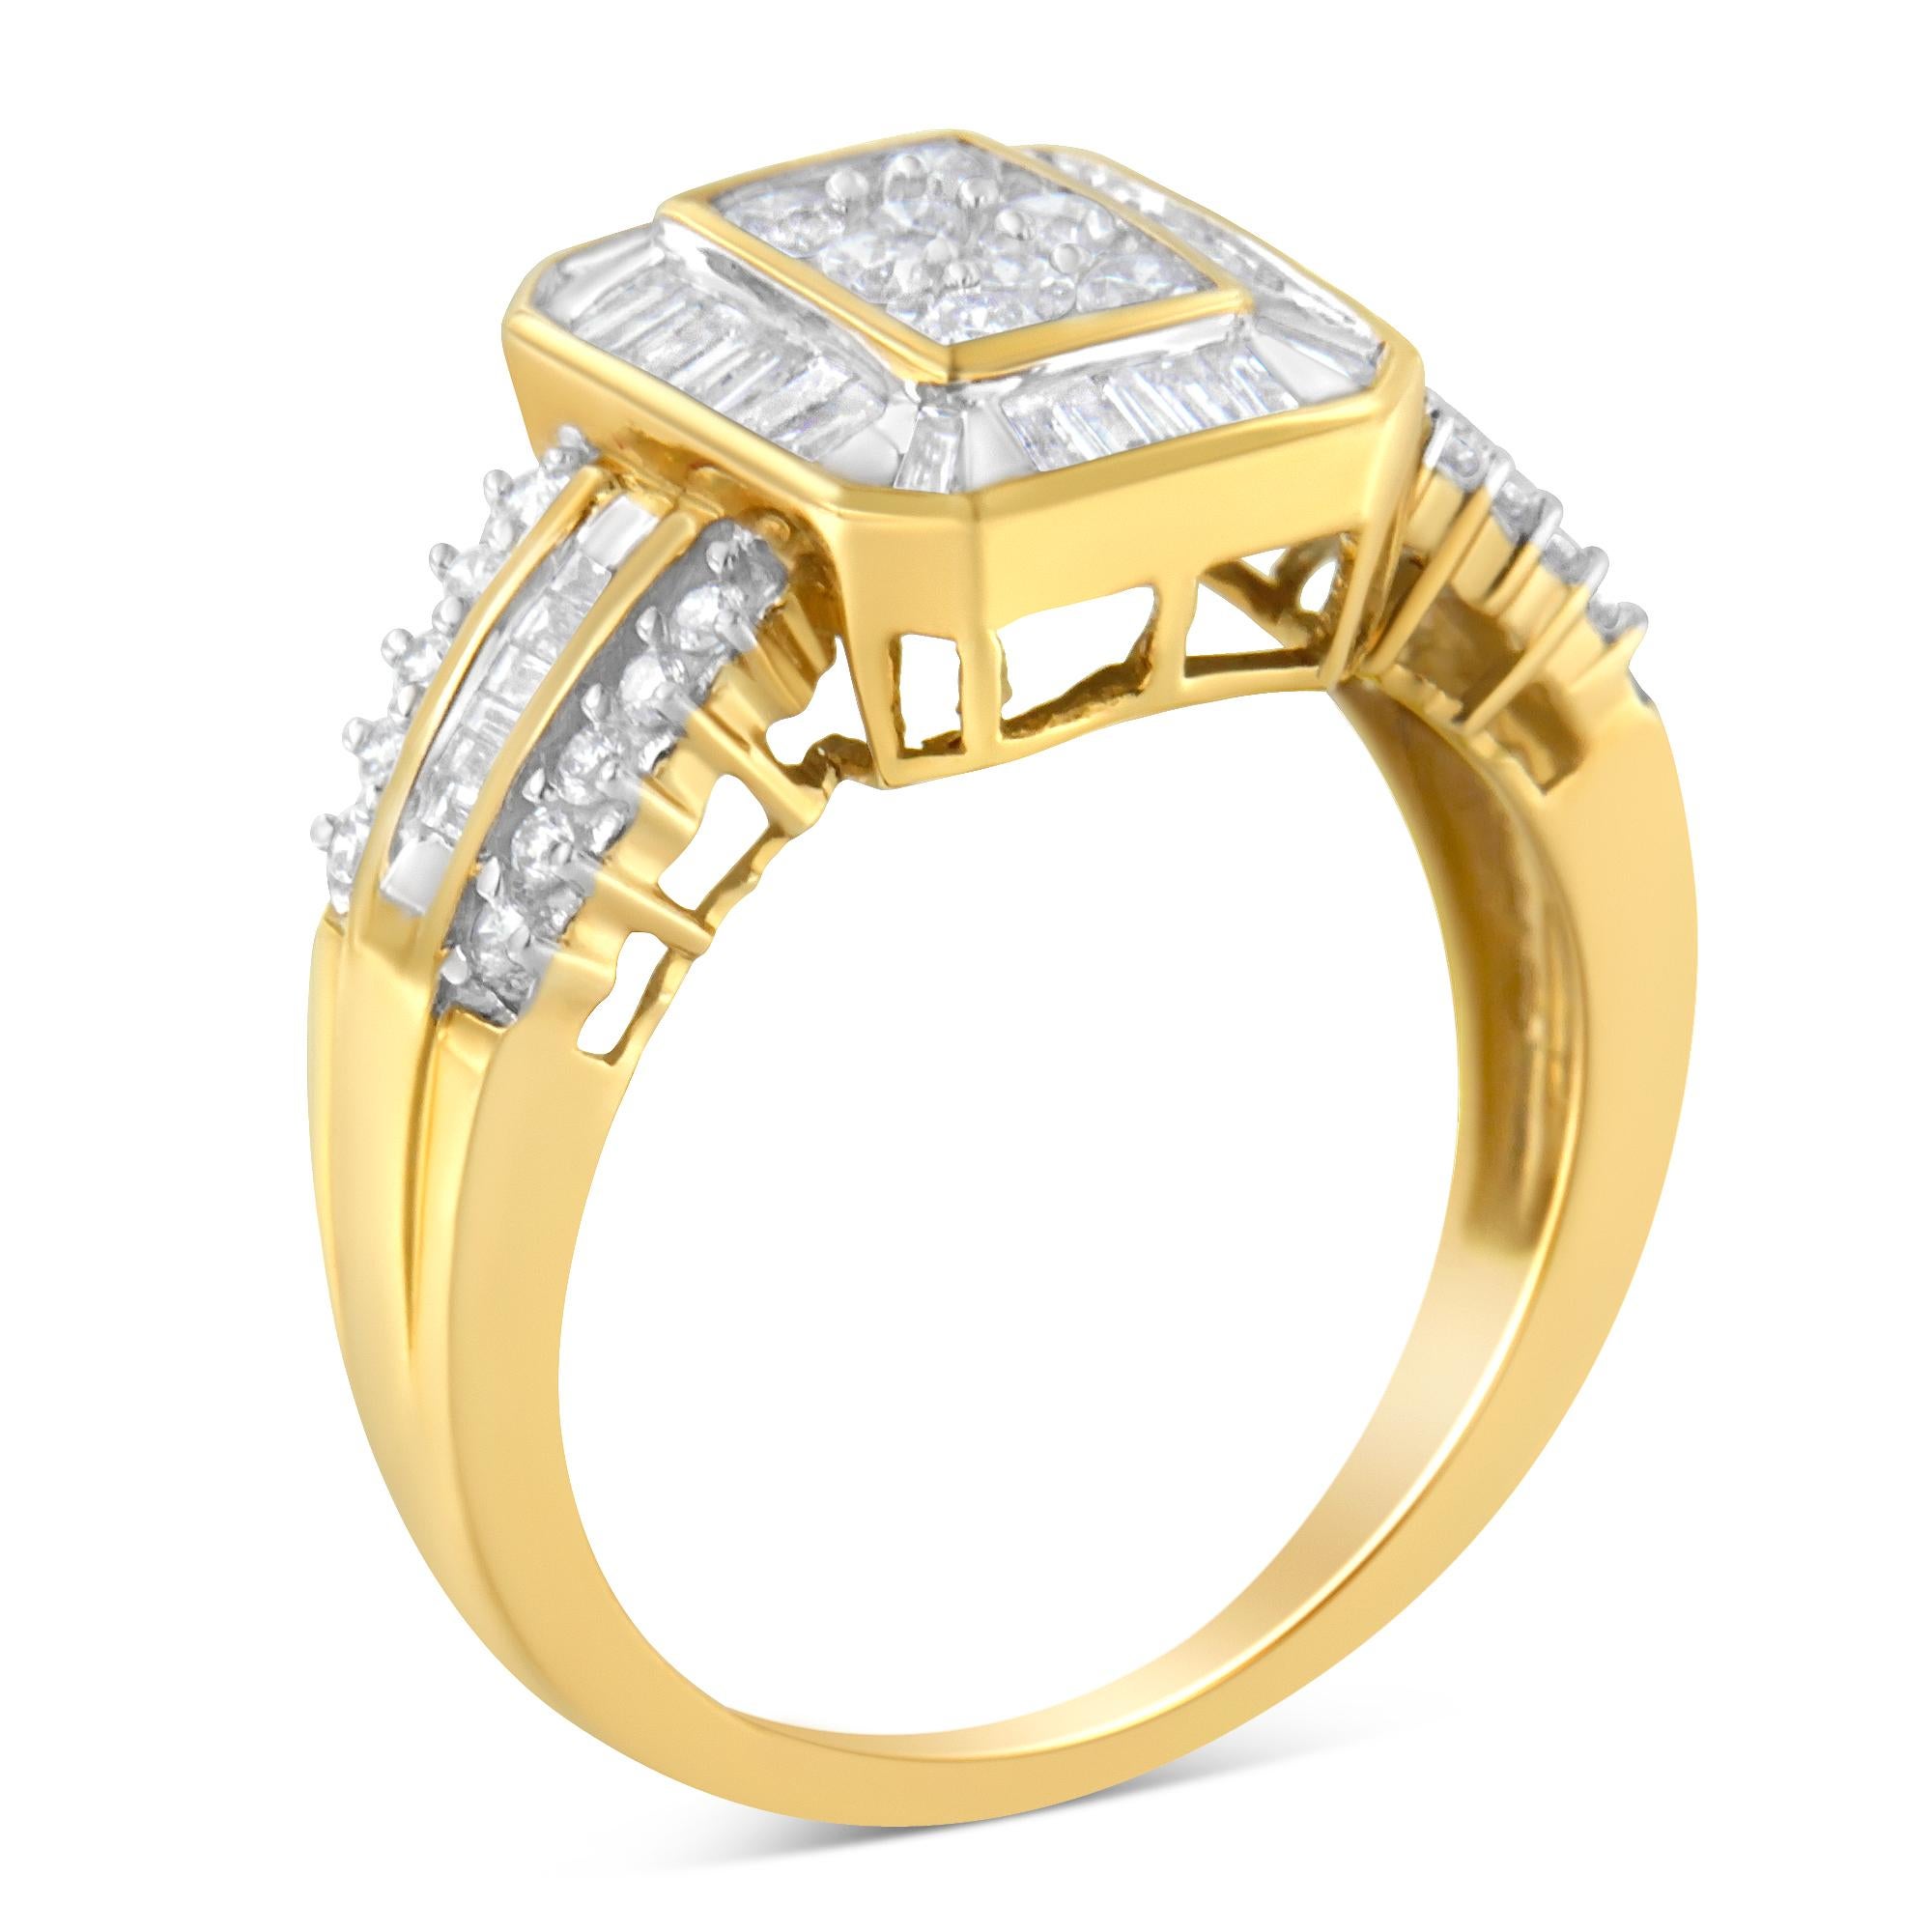 For Sale:  10K Yellow Gold 1.0 Carat Diamond Cocktail Ring 4